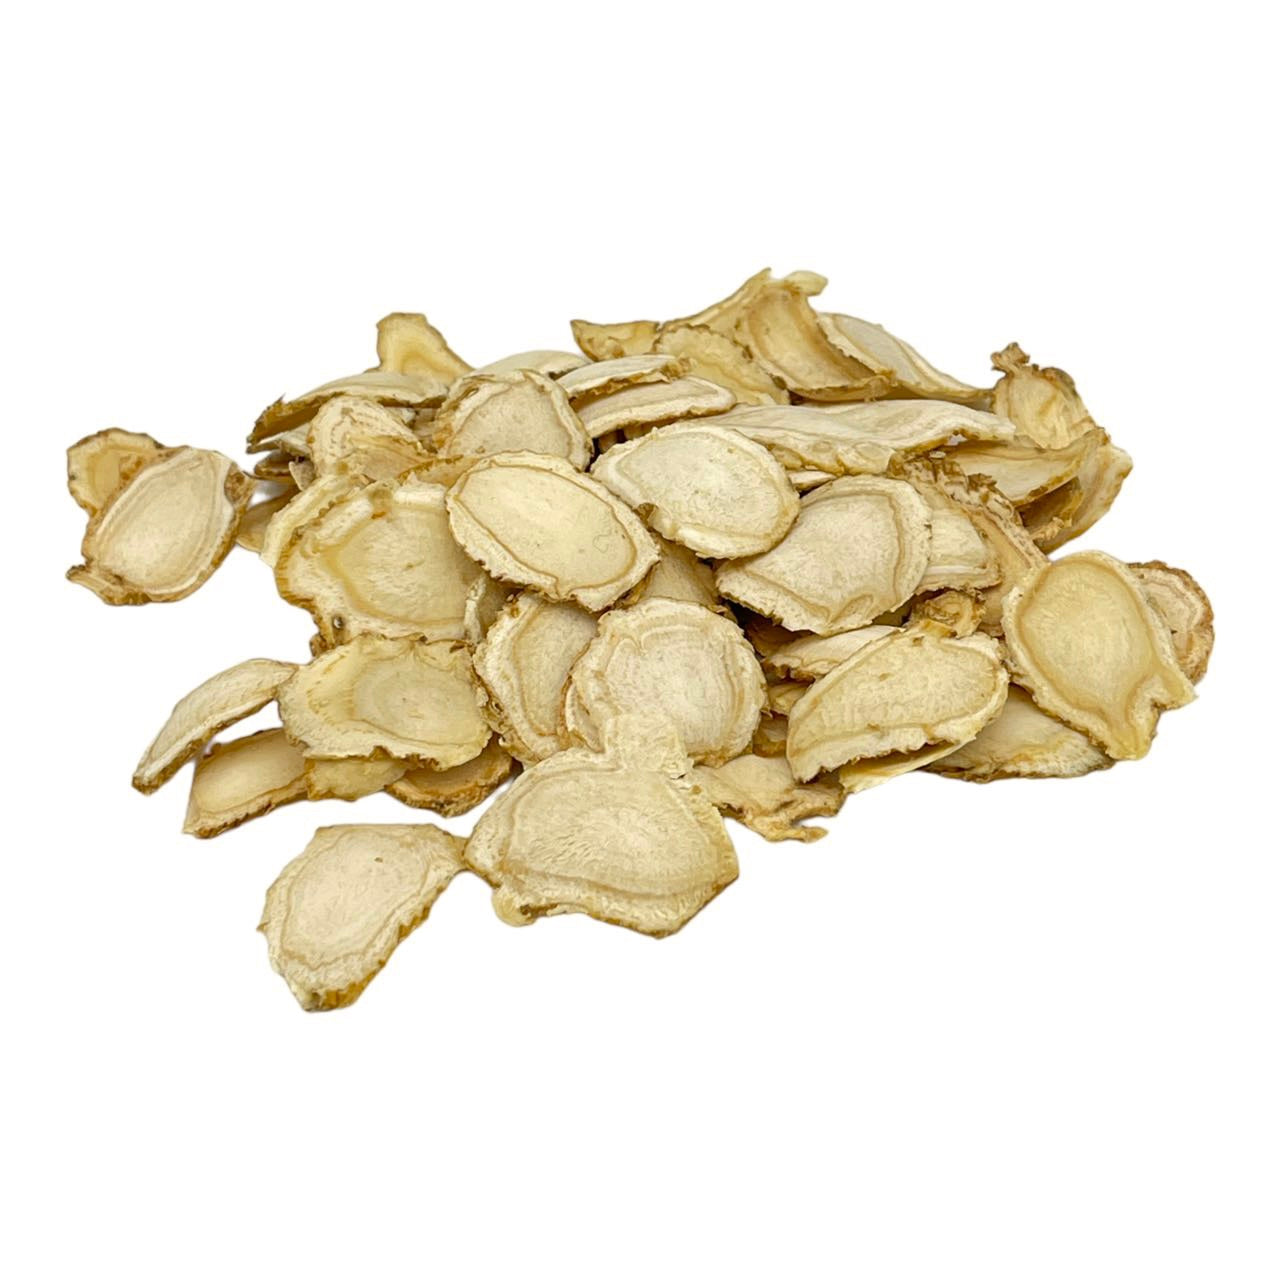 "NATIVE ULTRA" Canadian 5-Year Ginseng Slices, 120g/bottle